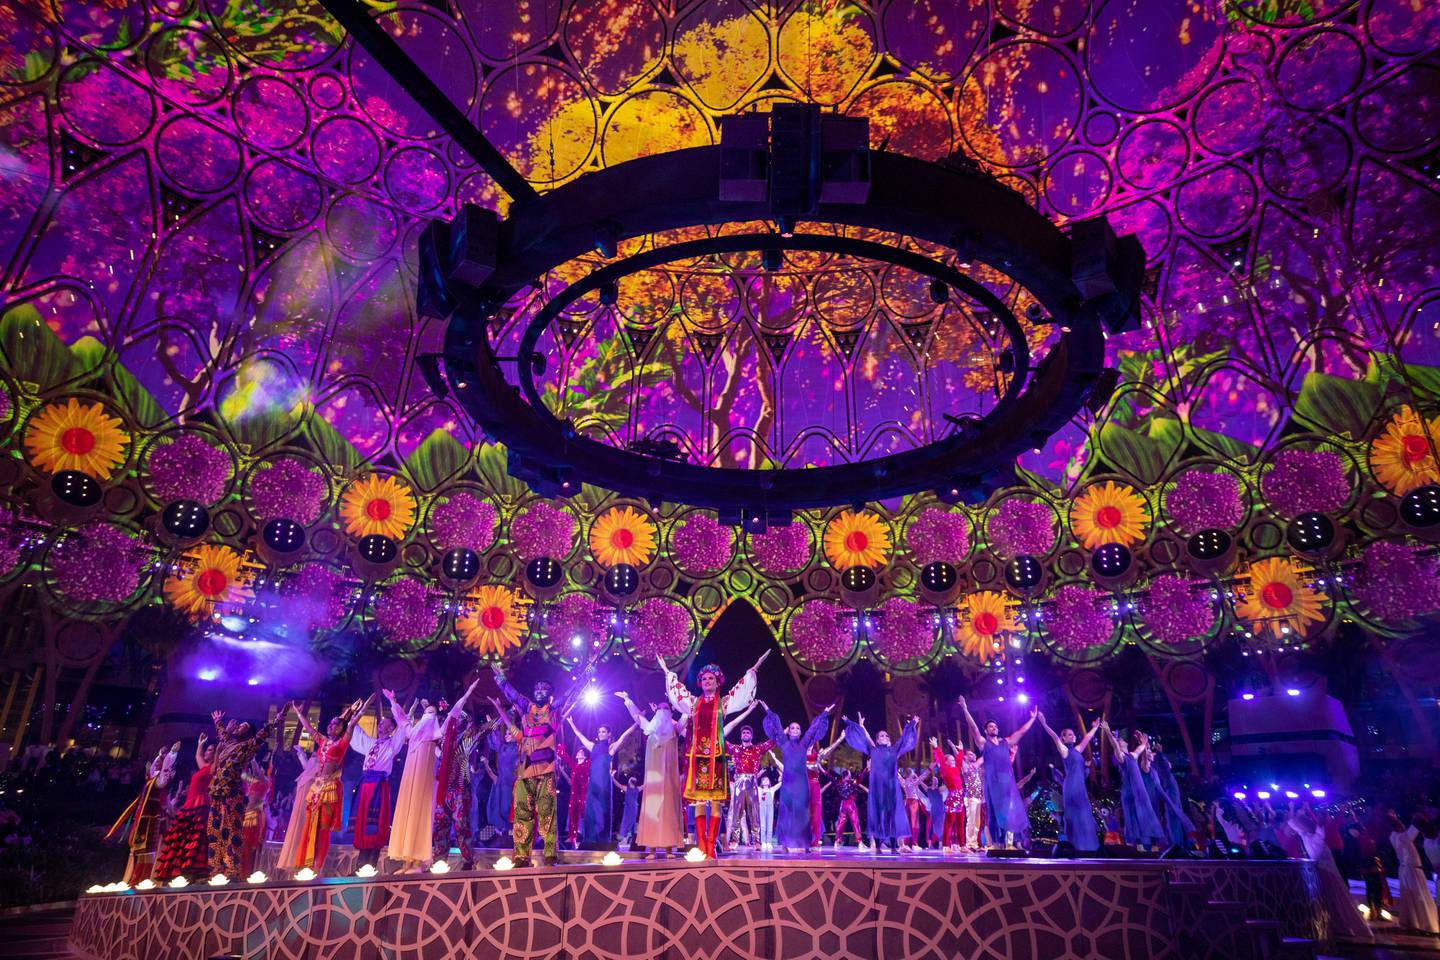 'Why? The Musical' features more than 100 performers and stunning visuals projected on Al Wasl Dome. Photo: Dubai Media Office